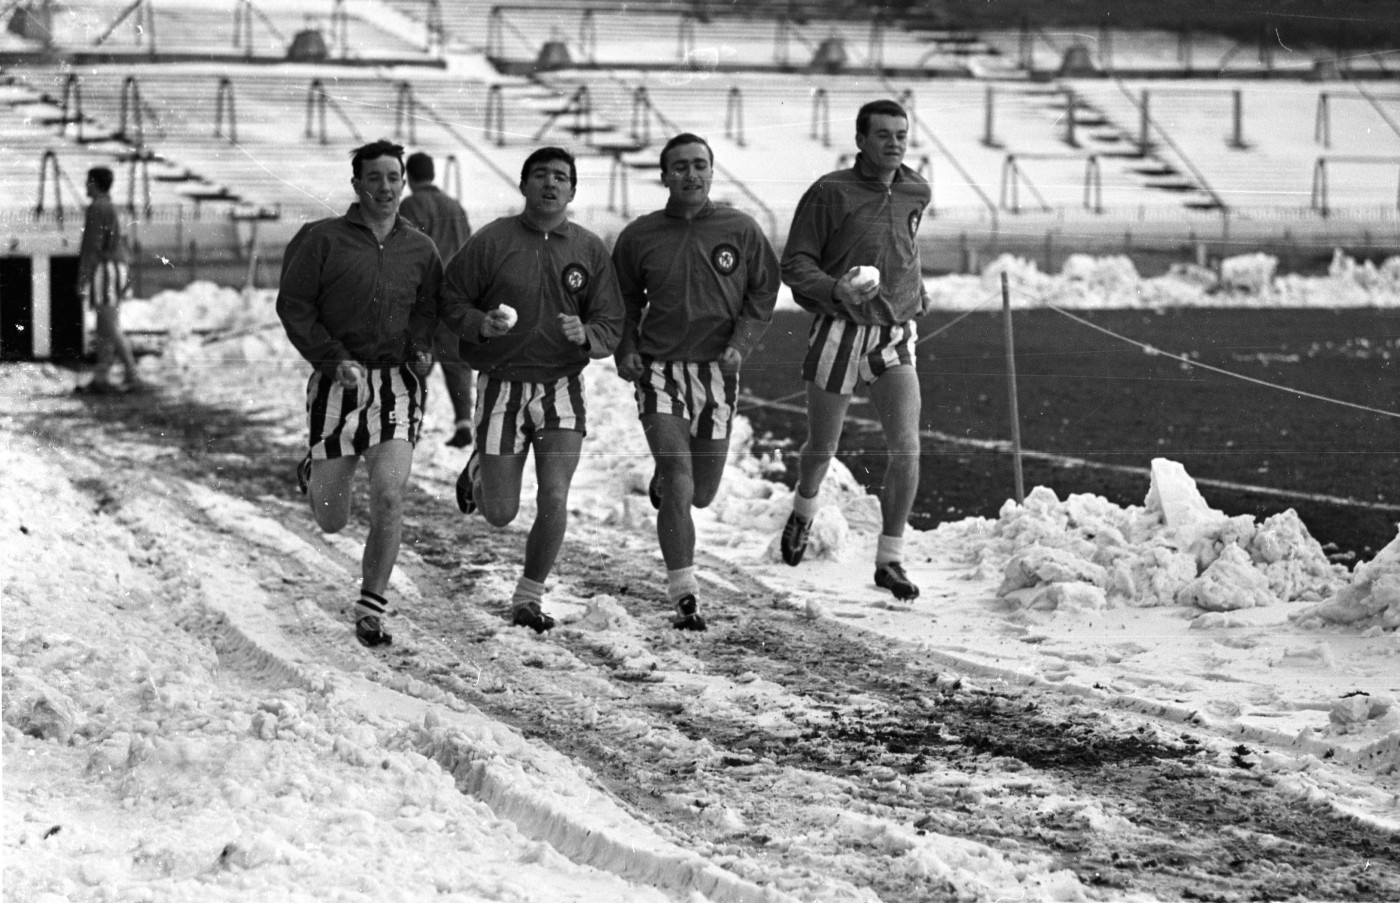 John Boyle, Terry Venables, Ron Harris and Eddie McCreadie train at a snowy Stamford Bridge 10 days before the first leg of the League Cup final was played there